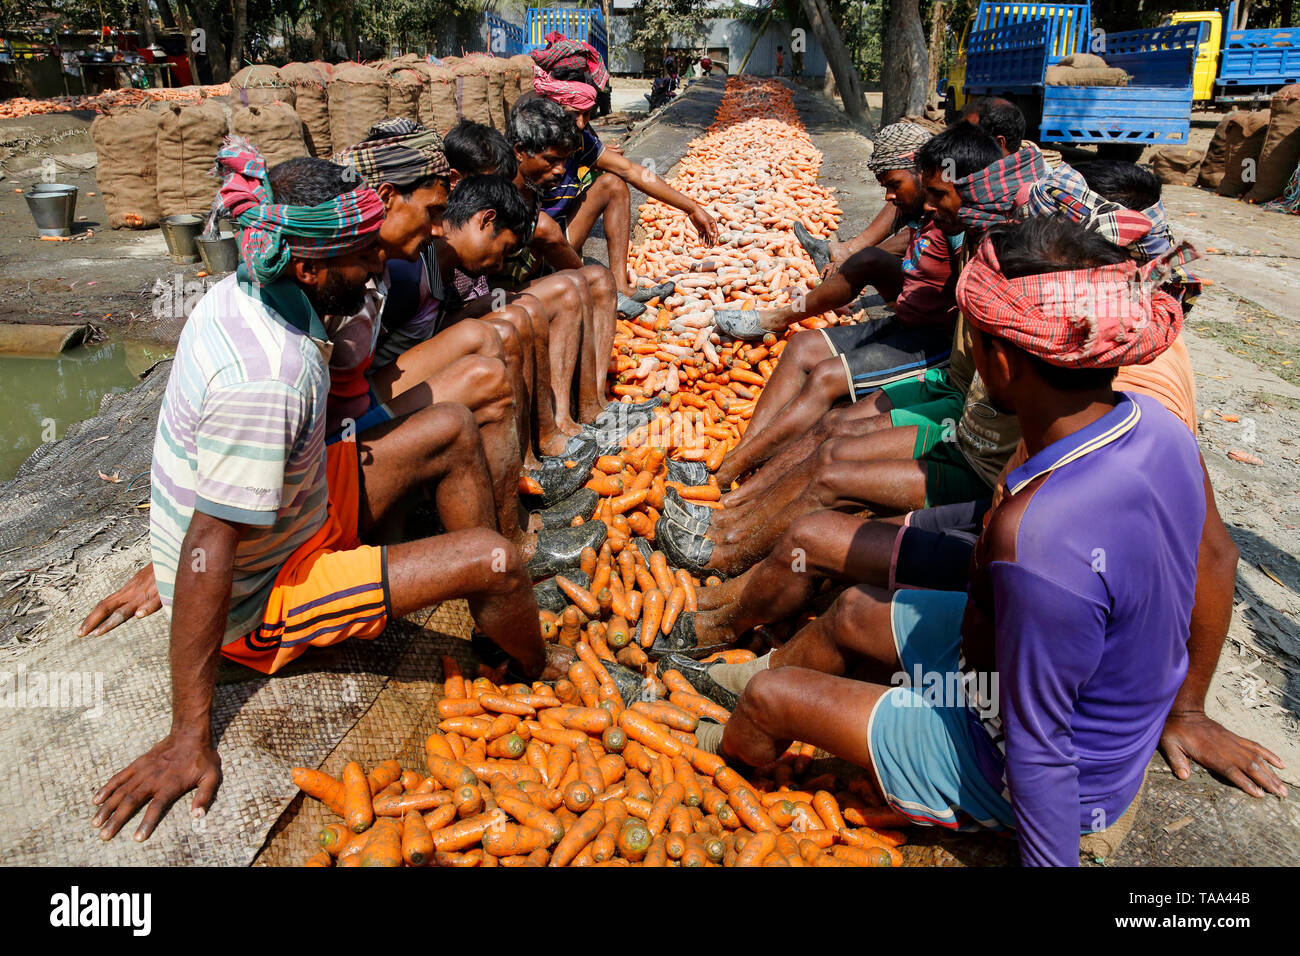 Workers using their feet to rub soil from the carrots before sending them to markets. Manikganj, Bangladesh. Stock Photo